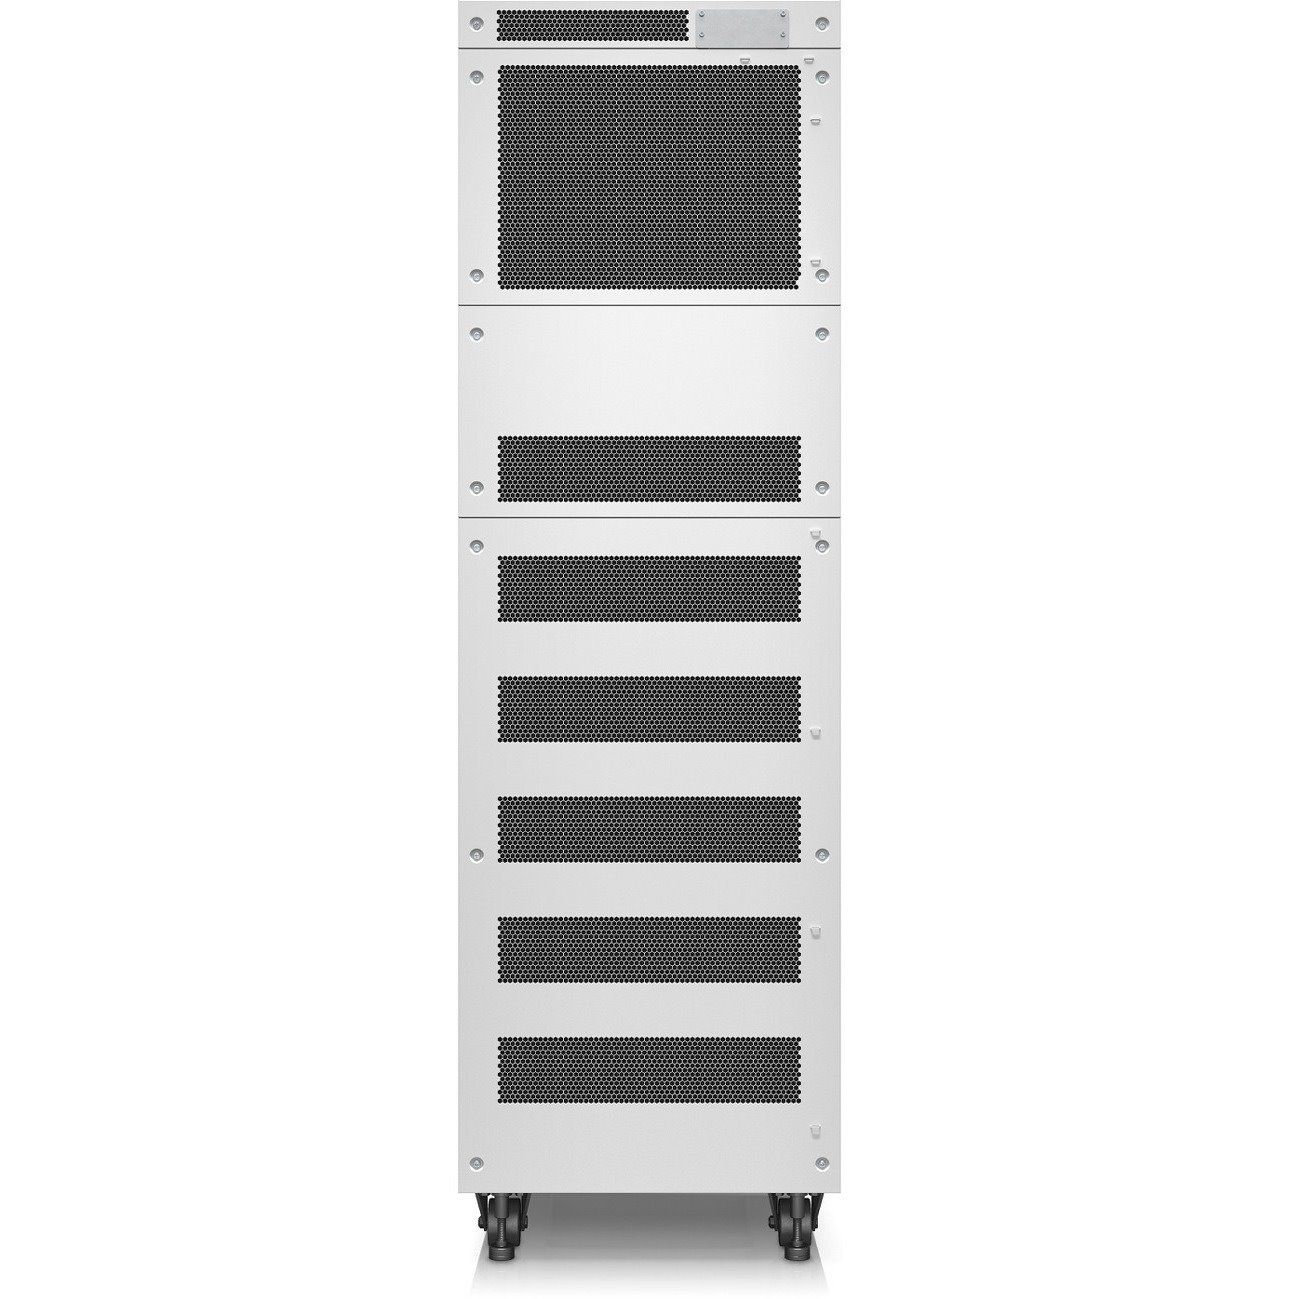 APC by Schneider Electric Easy UPS 3M Double Conversion Online UPS - 80 kVA - Three Phase